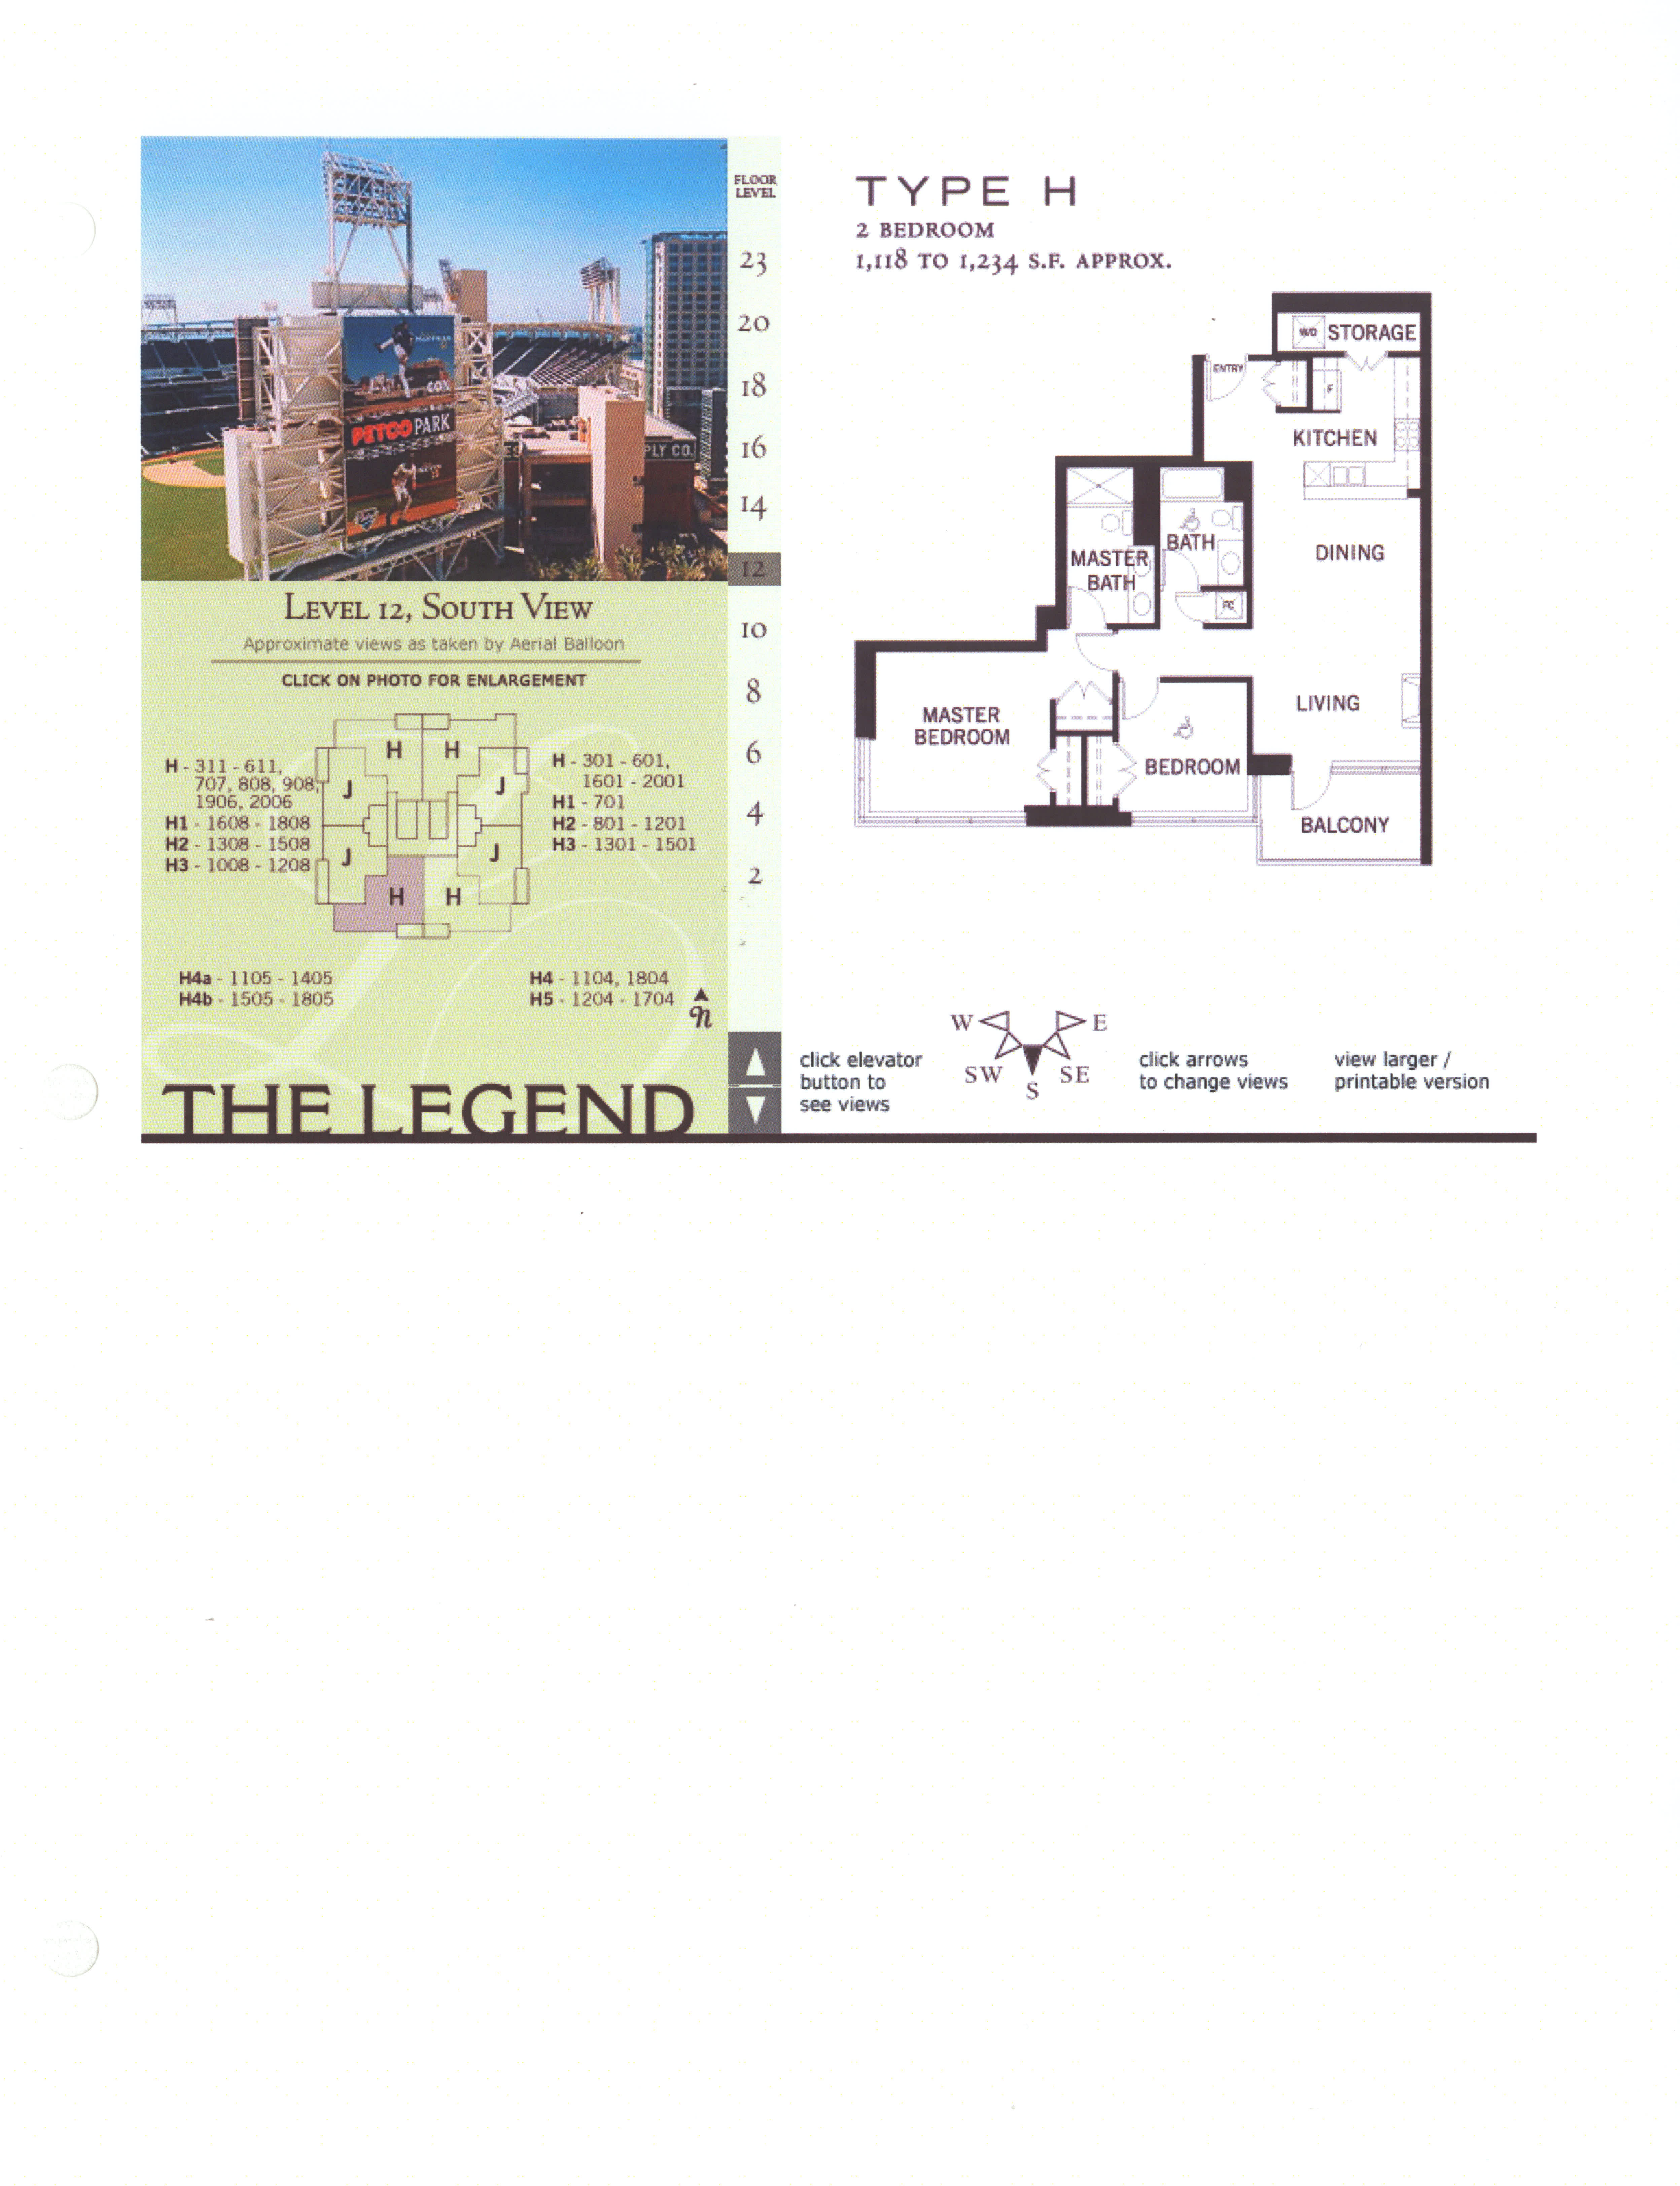 The Legend Floor Plan Level 12, South View – Type H